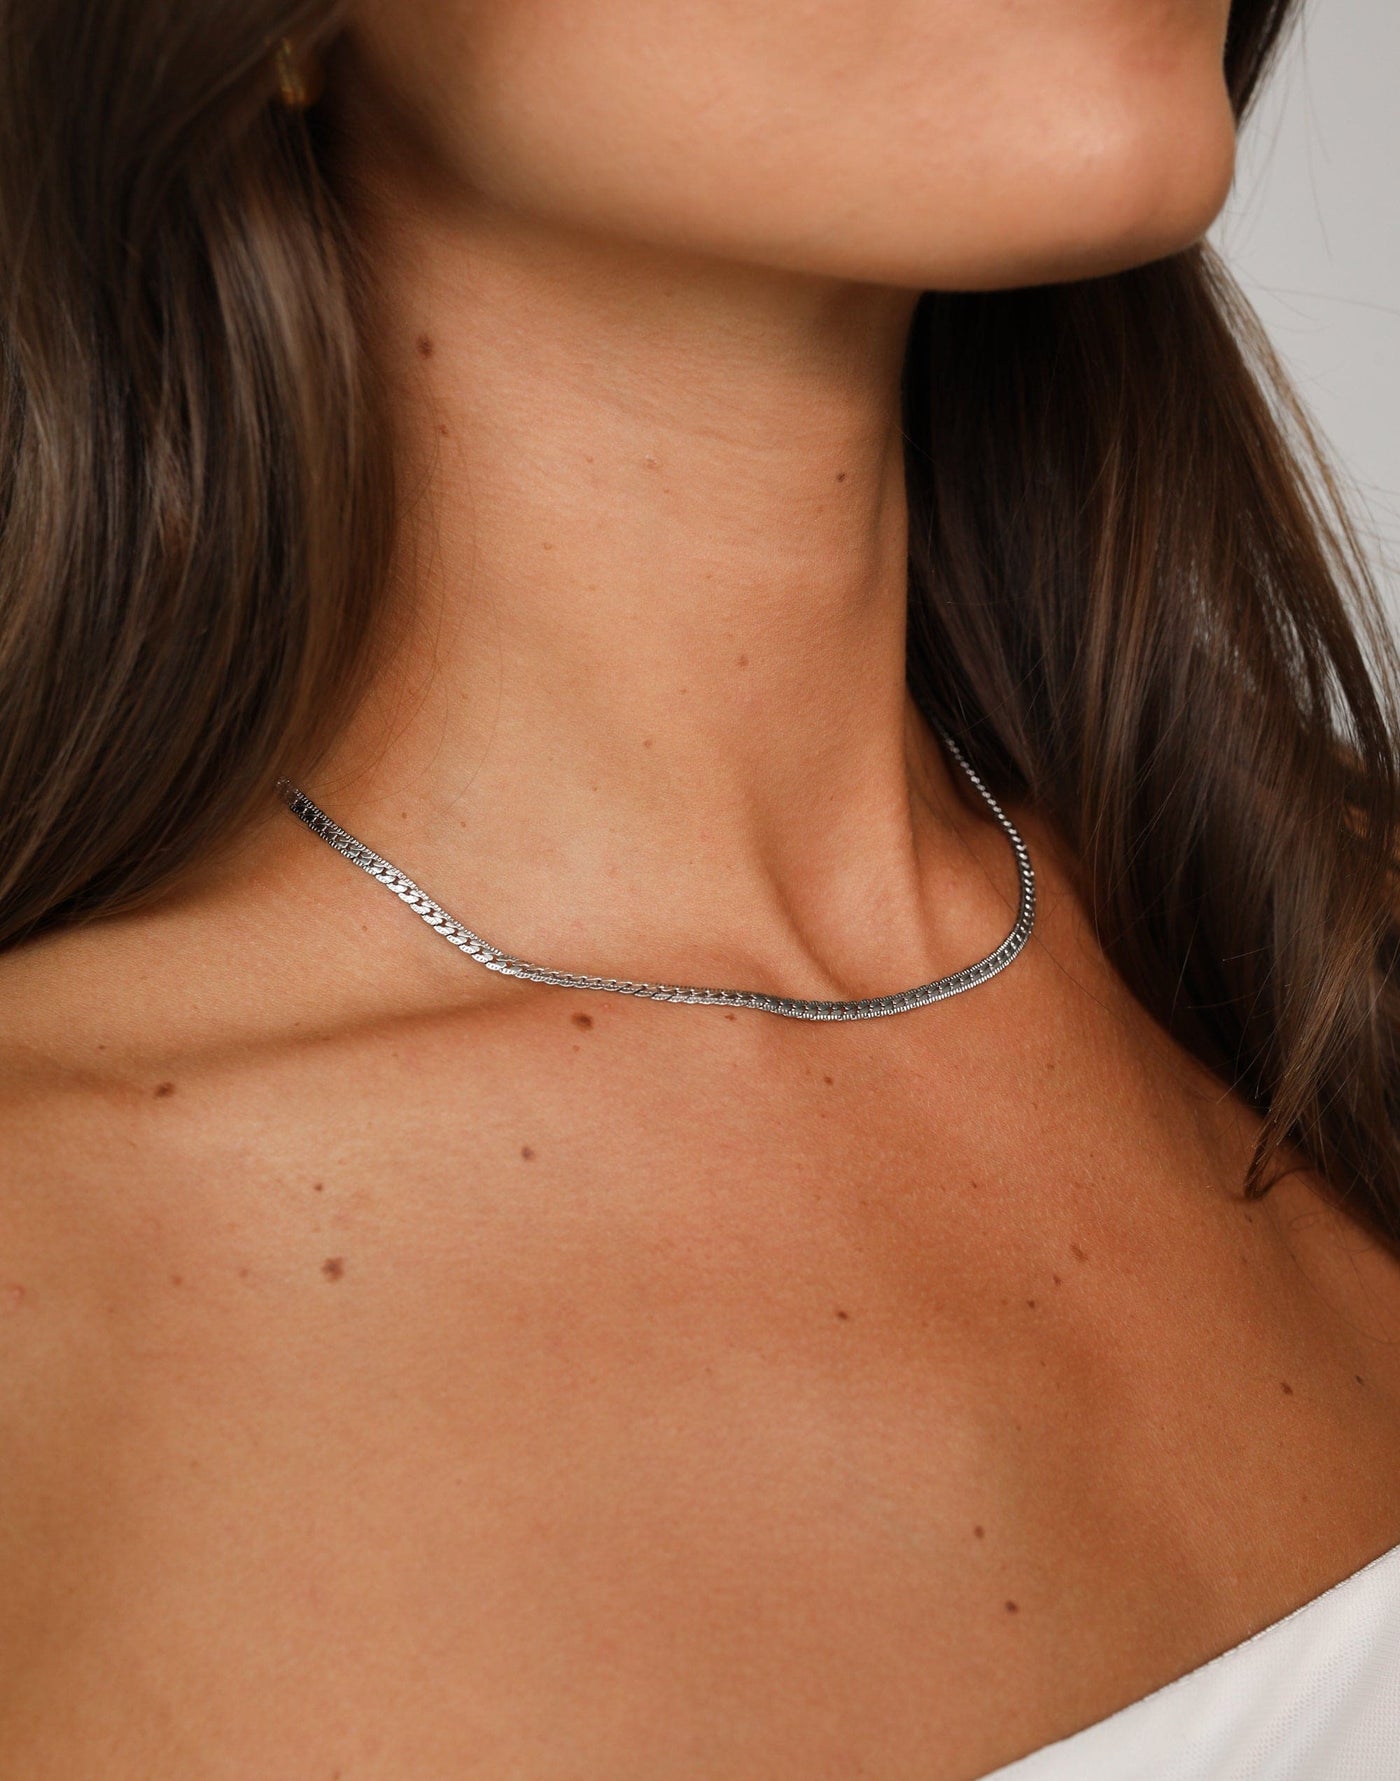 Amanta Necklace (Silver) | Charcoal Clothing Exclusive - Braided Chain Necklace - Women's Accessories - Charcoal Clothing